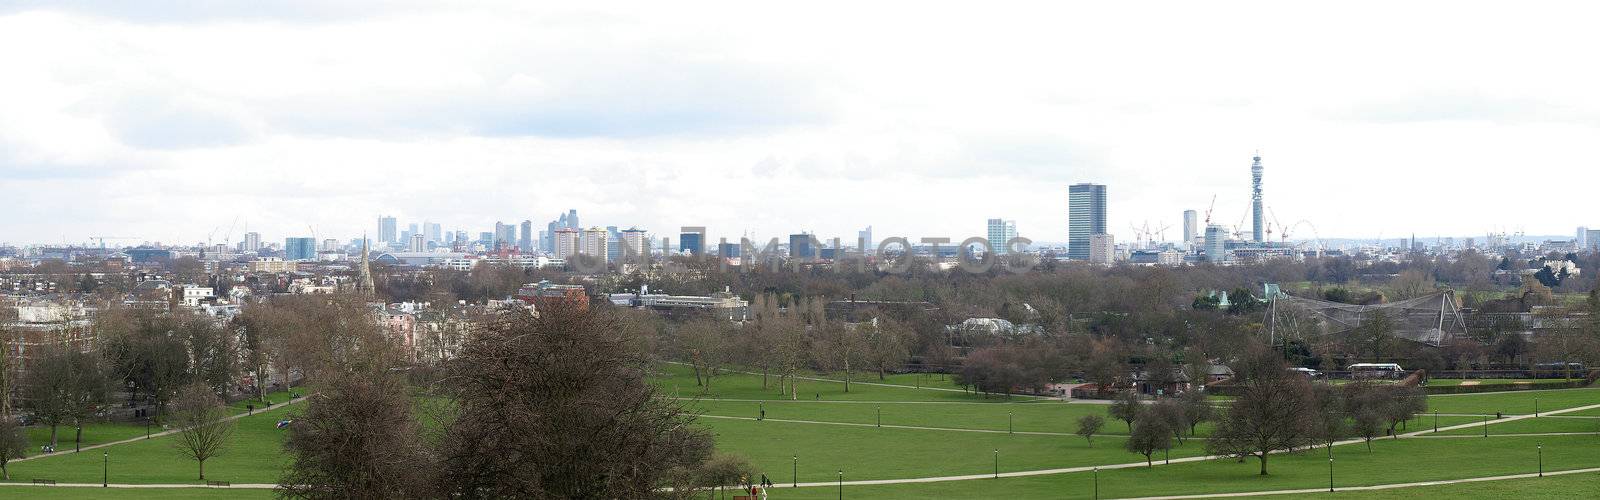 Panoramic view of London skyline seen from Primrose Hill